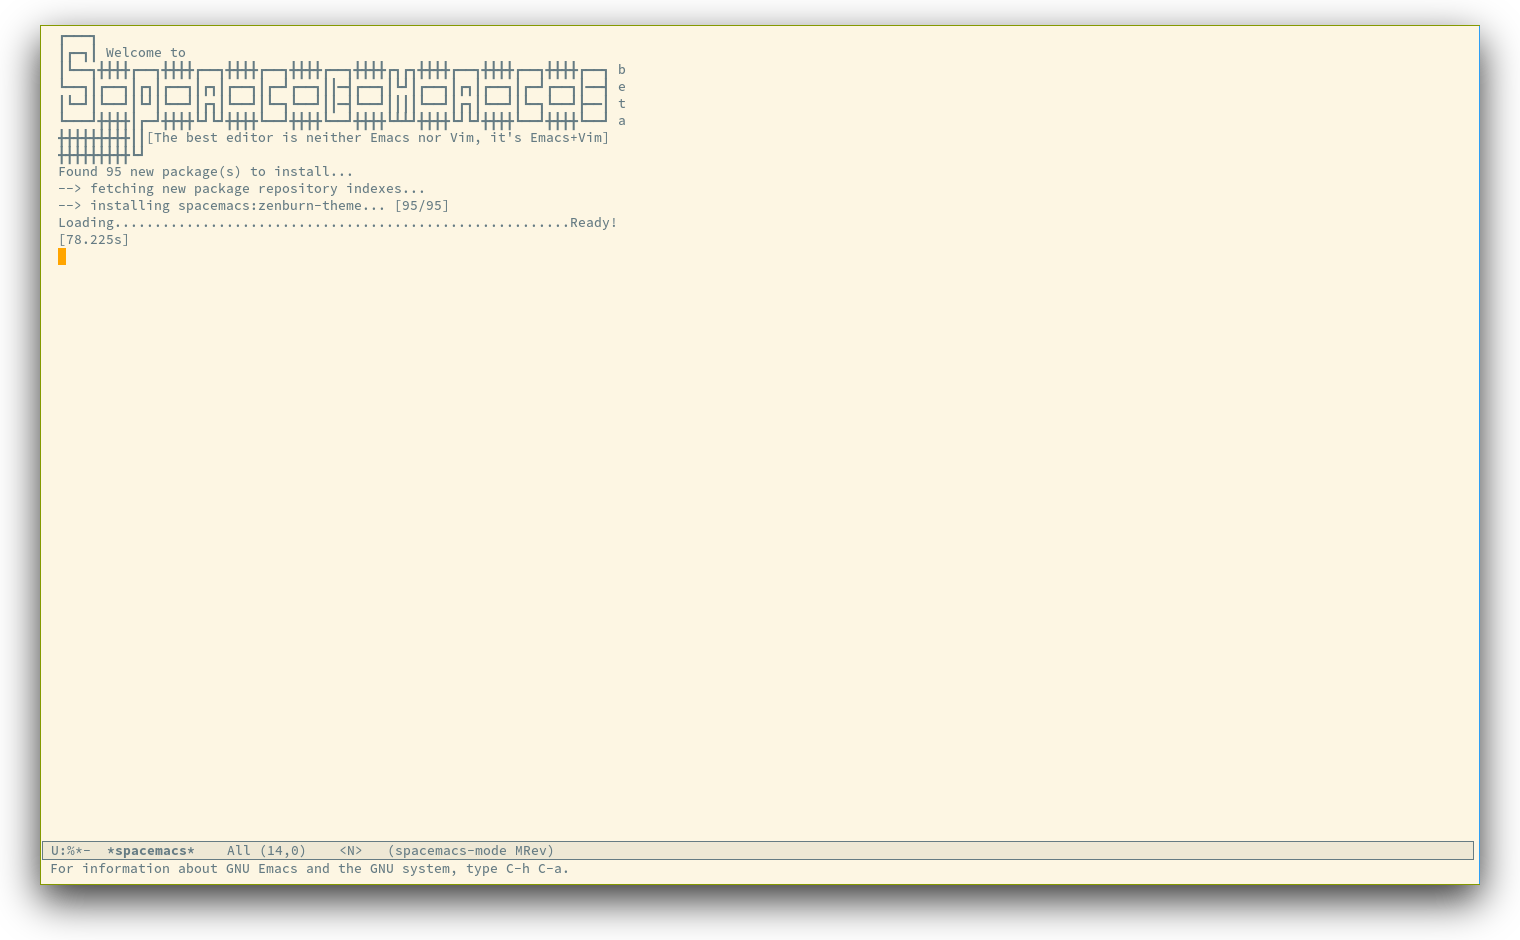 /TakeV/spacemacs/media/commit/414472cb9ee8fca541e5e9239d651b35843e4e5c/doc/img/spacemacs-startup.png